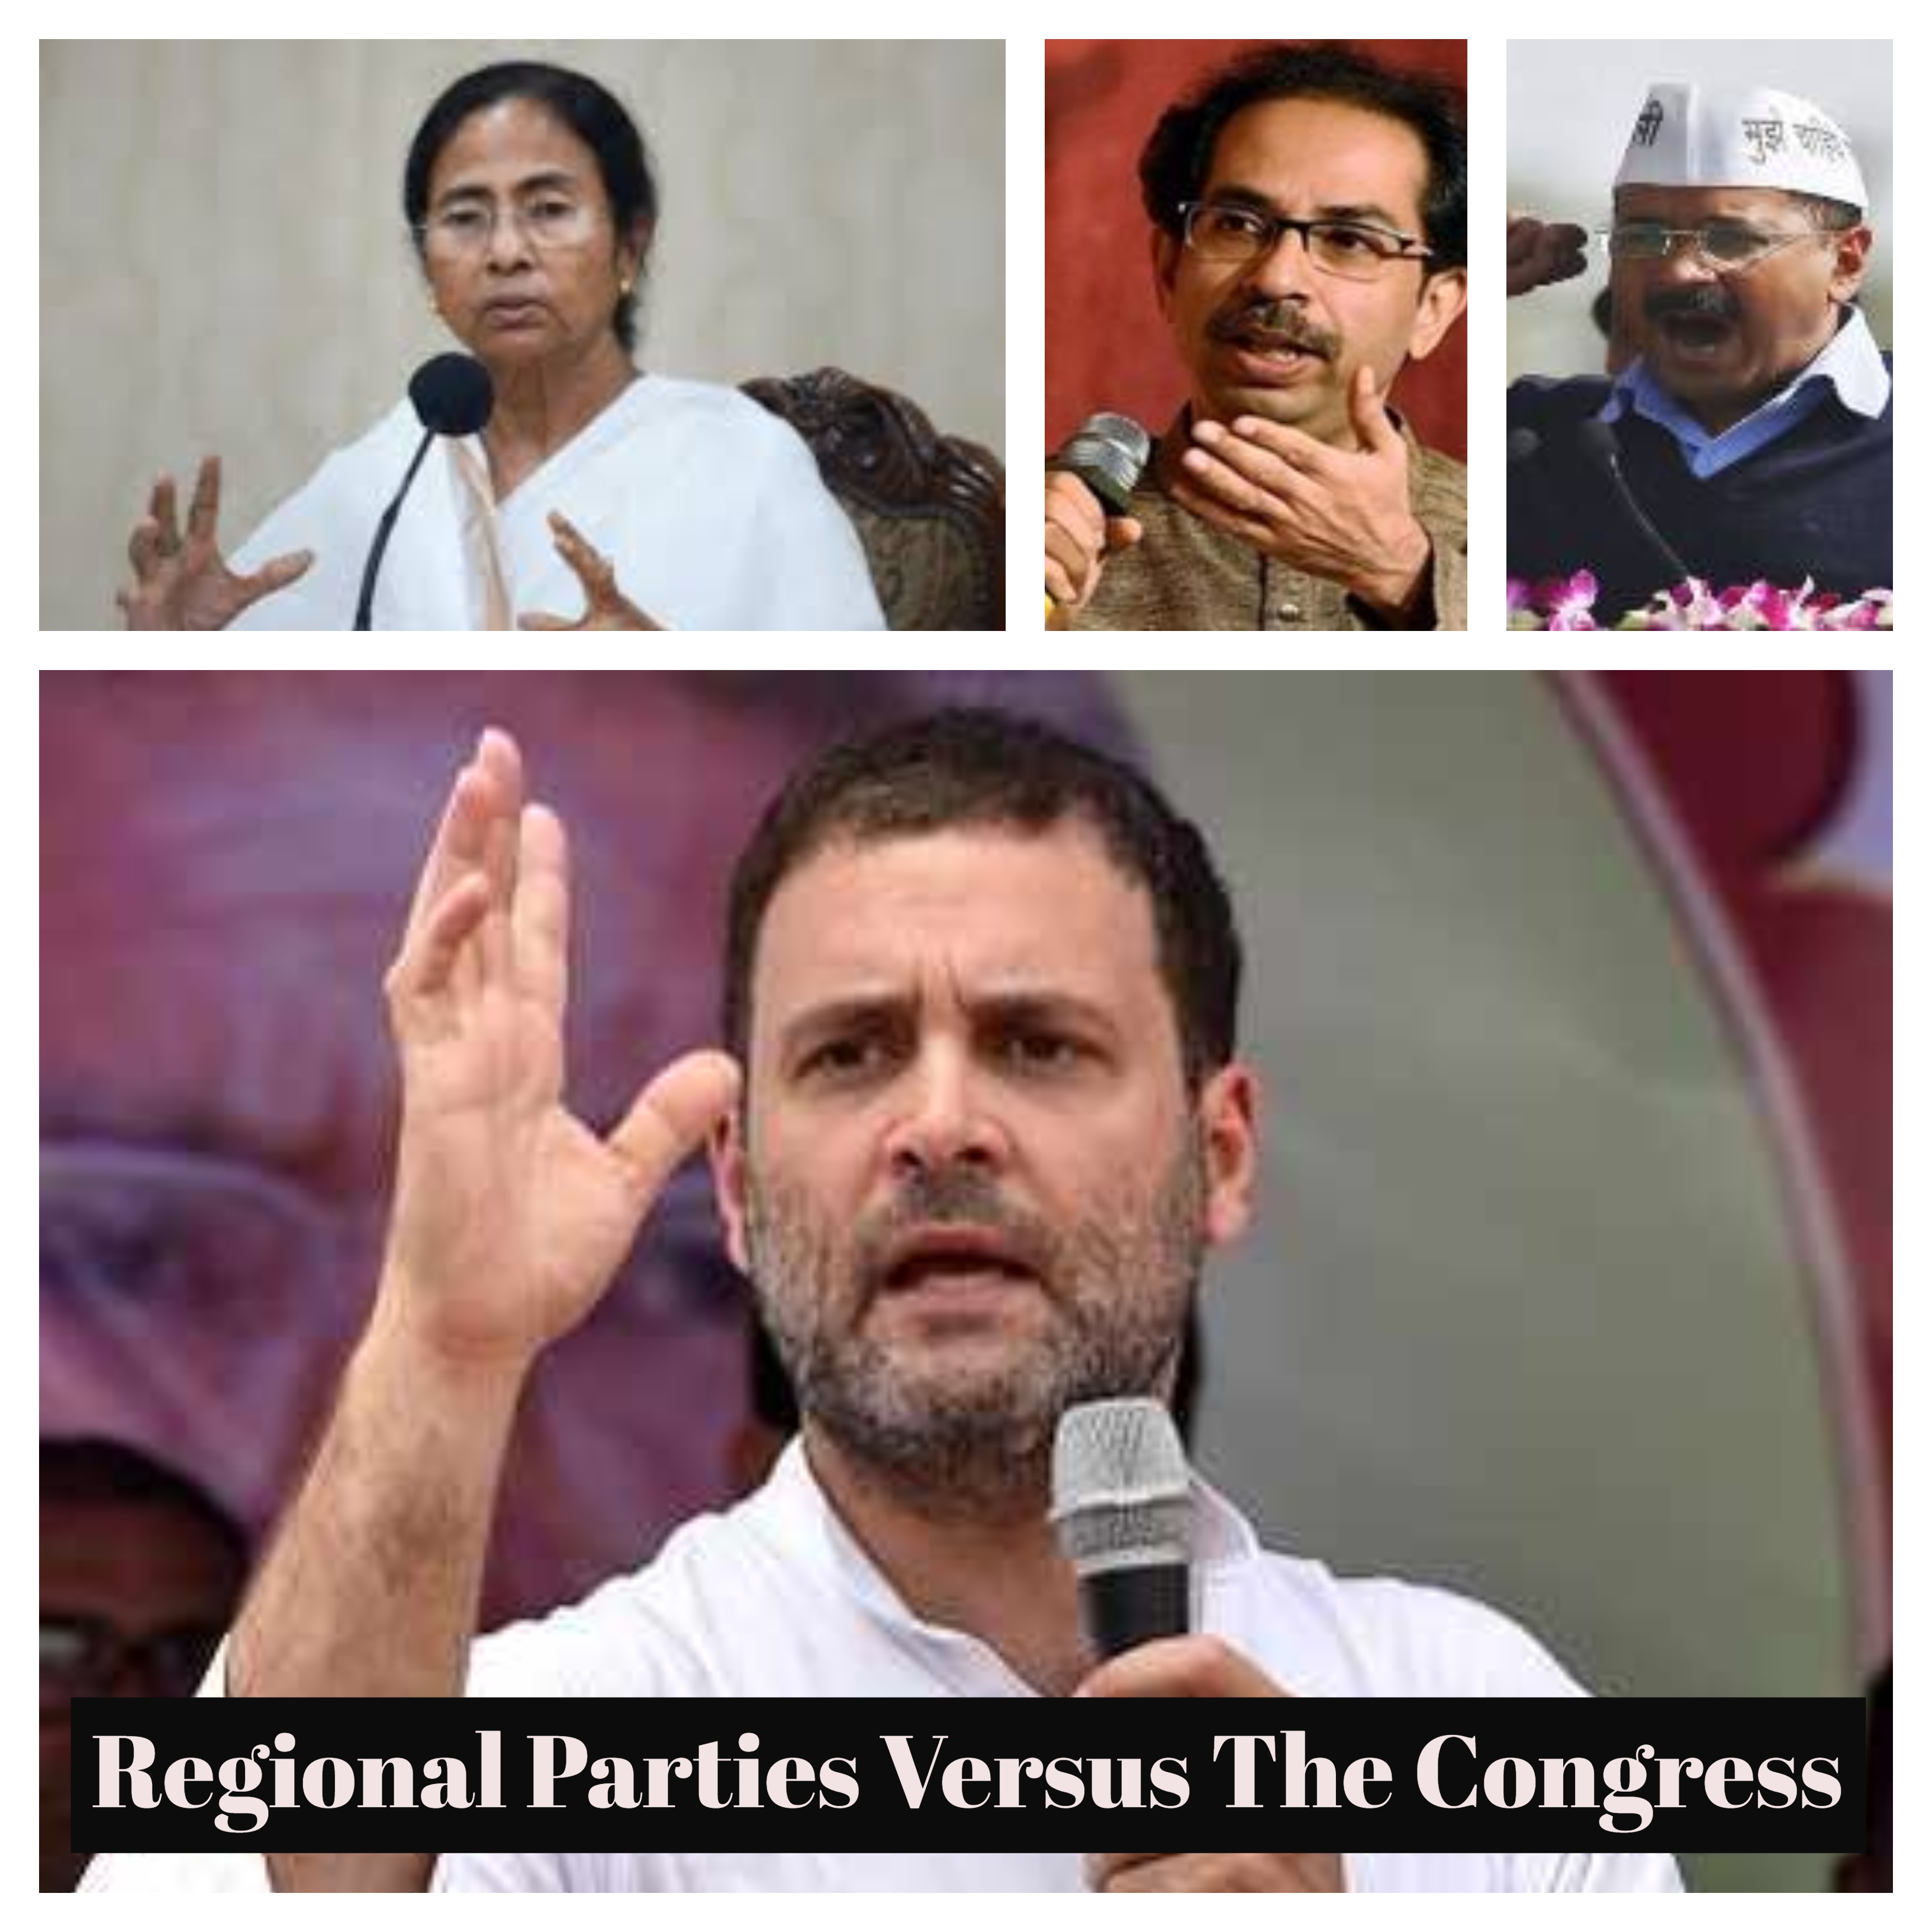 BJP Will Gain If The Regional Parties Rubbish The Congress